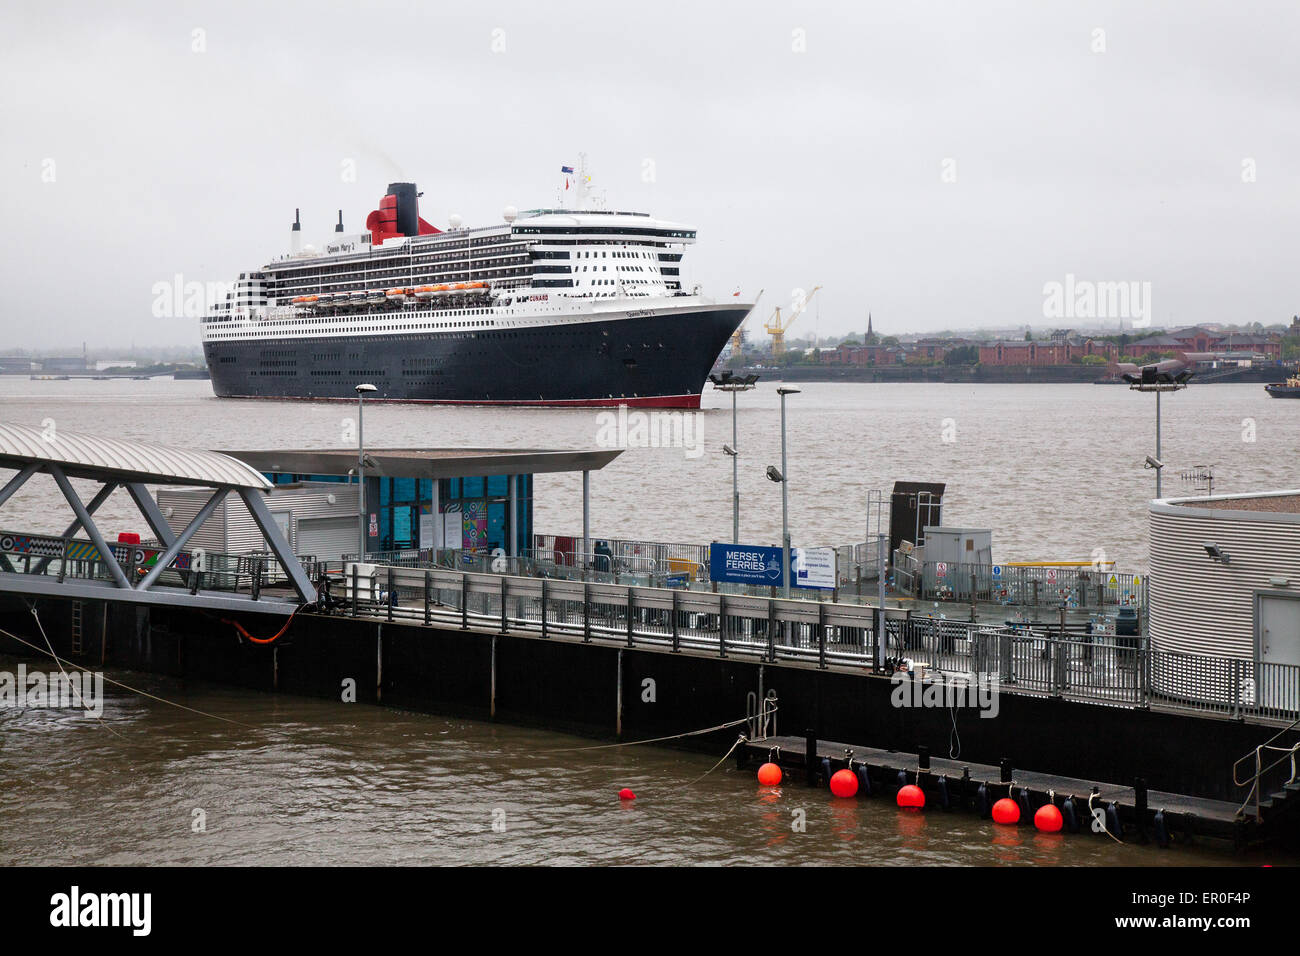 Liverpool, Merseyside, UK 24th May, 2015.  Cunard Queen Mary arrival at dawn at Princes Dock Cruise Terminal. The flagship is the first of the company's three of luxury liners to arrive at Liverpool ahead of this Monday's celebrations which are expected to attract up to a million spectators. She will be joined by her two sister ships Queen Victoria and Queen Elizabeth in the following 24 hours for a sail past the city’s own three Queens to mark Cunard’s 175th birthday. Stock Photo